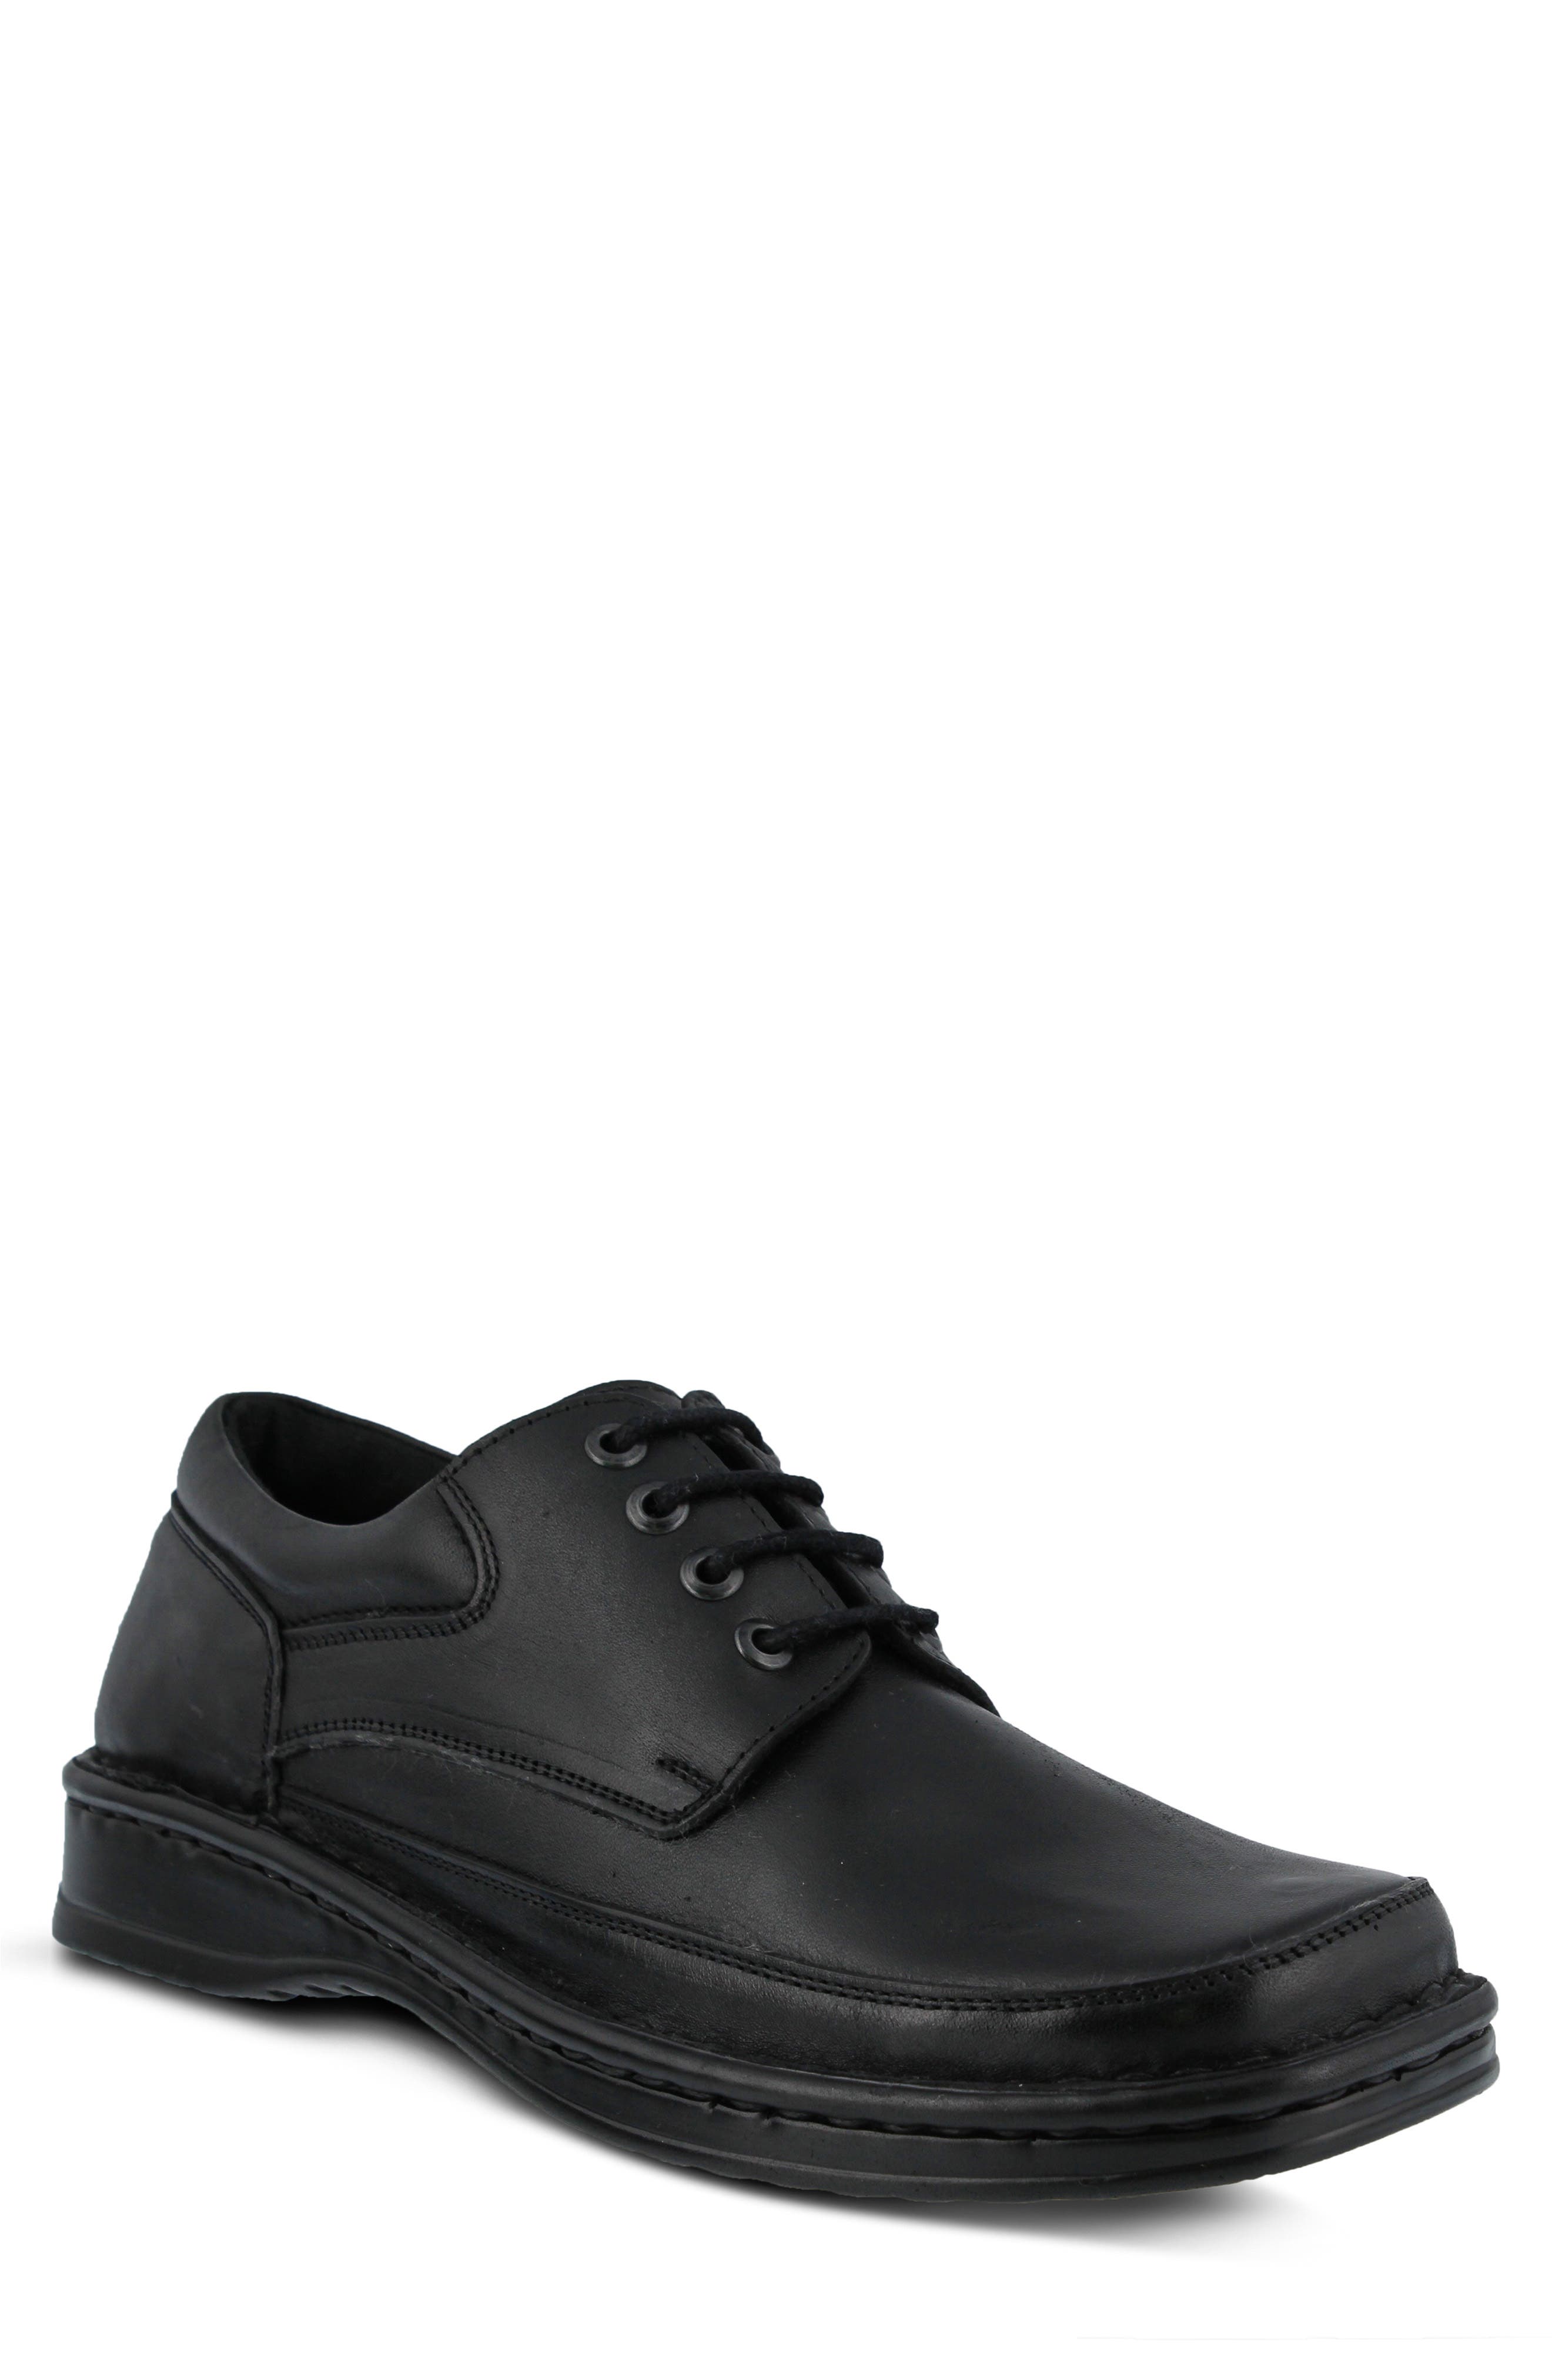 Mens Clarks Black Lace Up Shoes The Style Hook Spring 